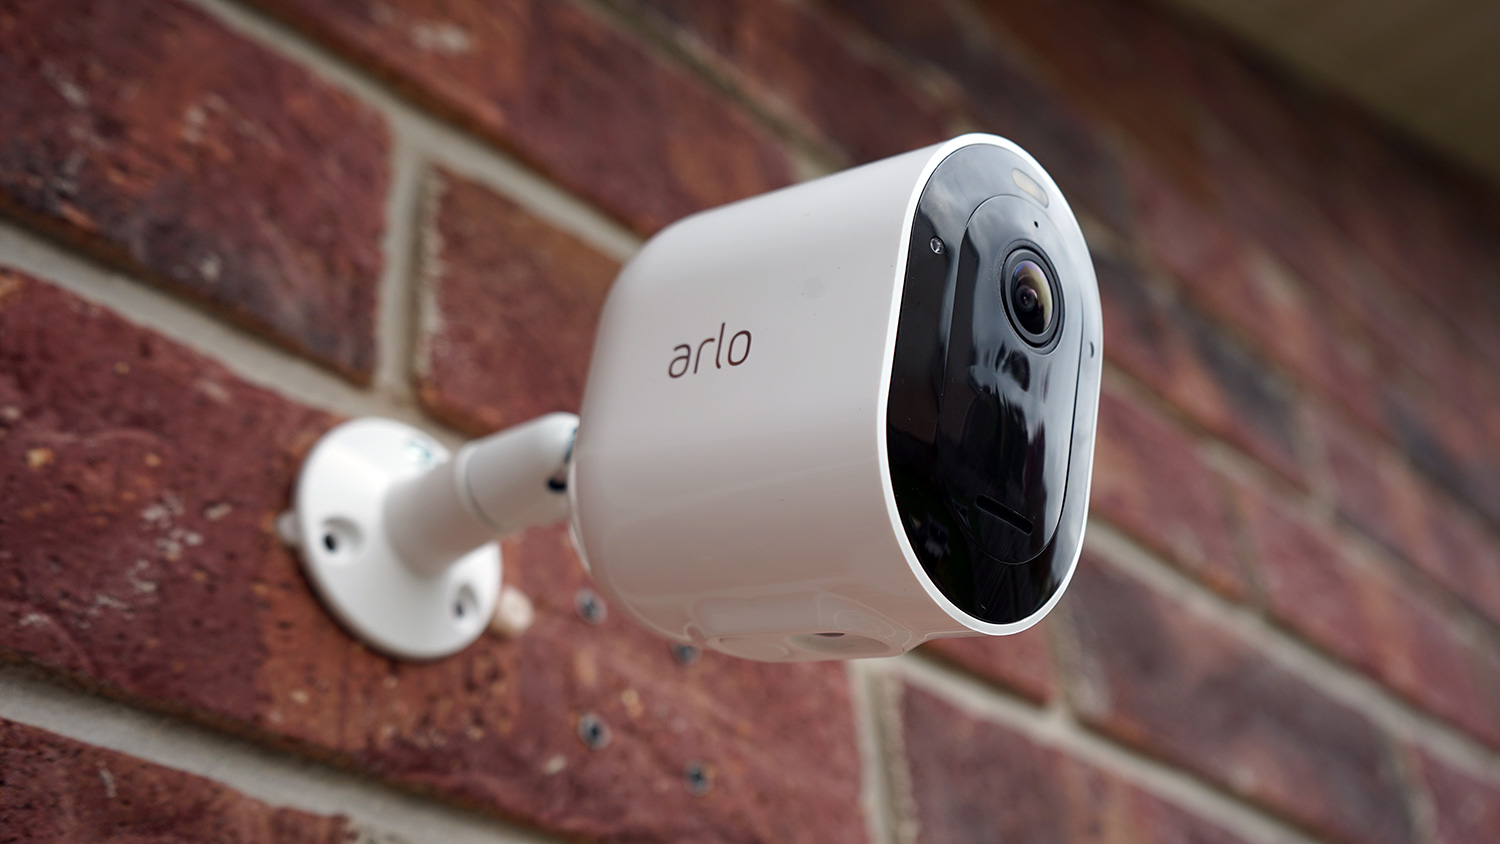 3 Review: A Great Choice For Smart Home Security | Digital Trends